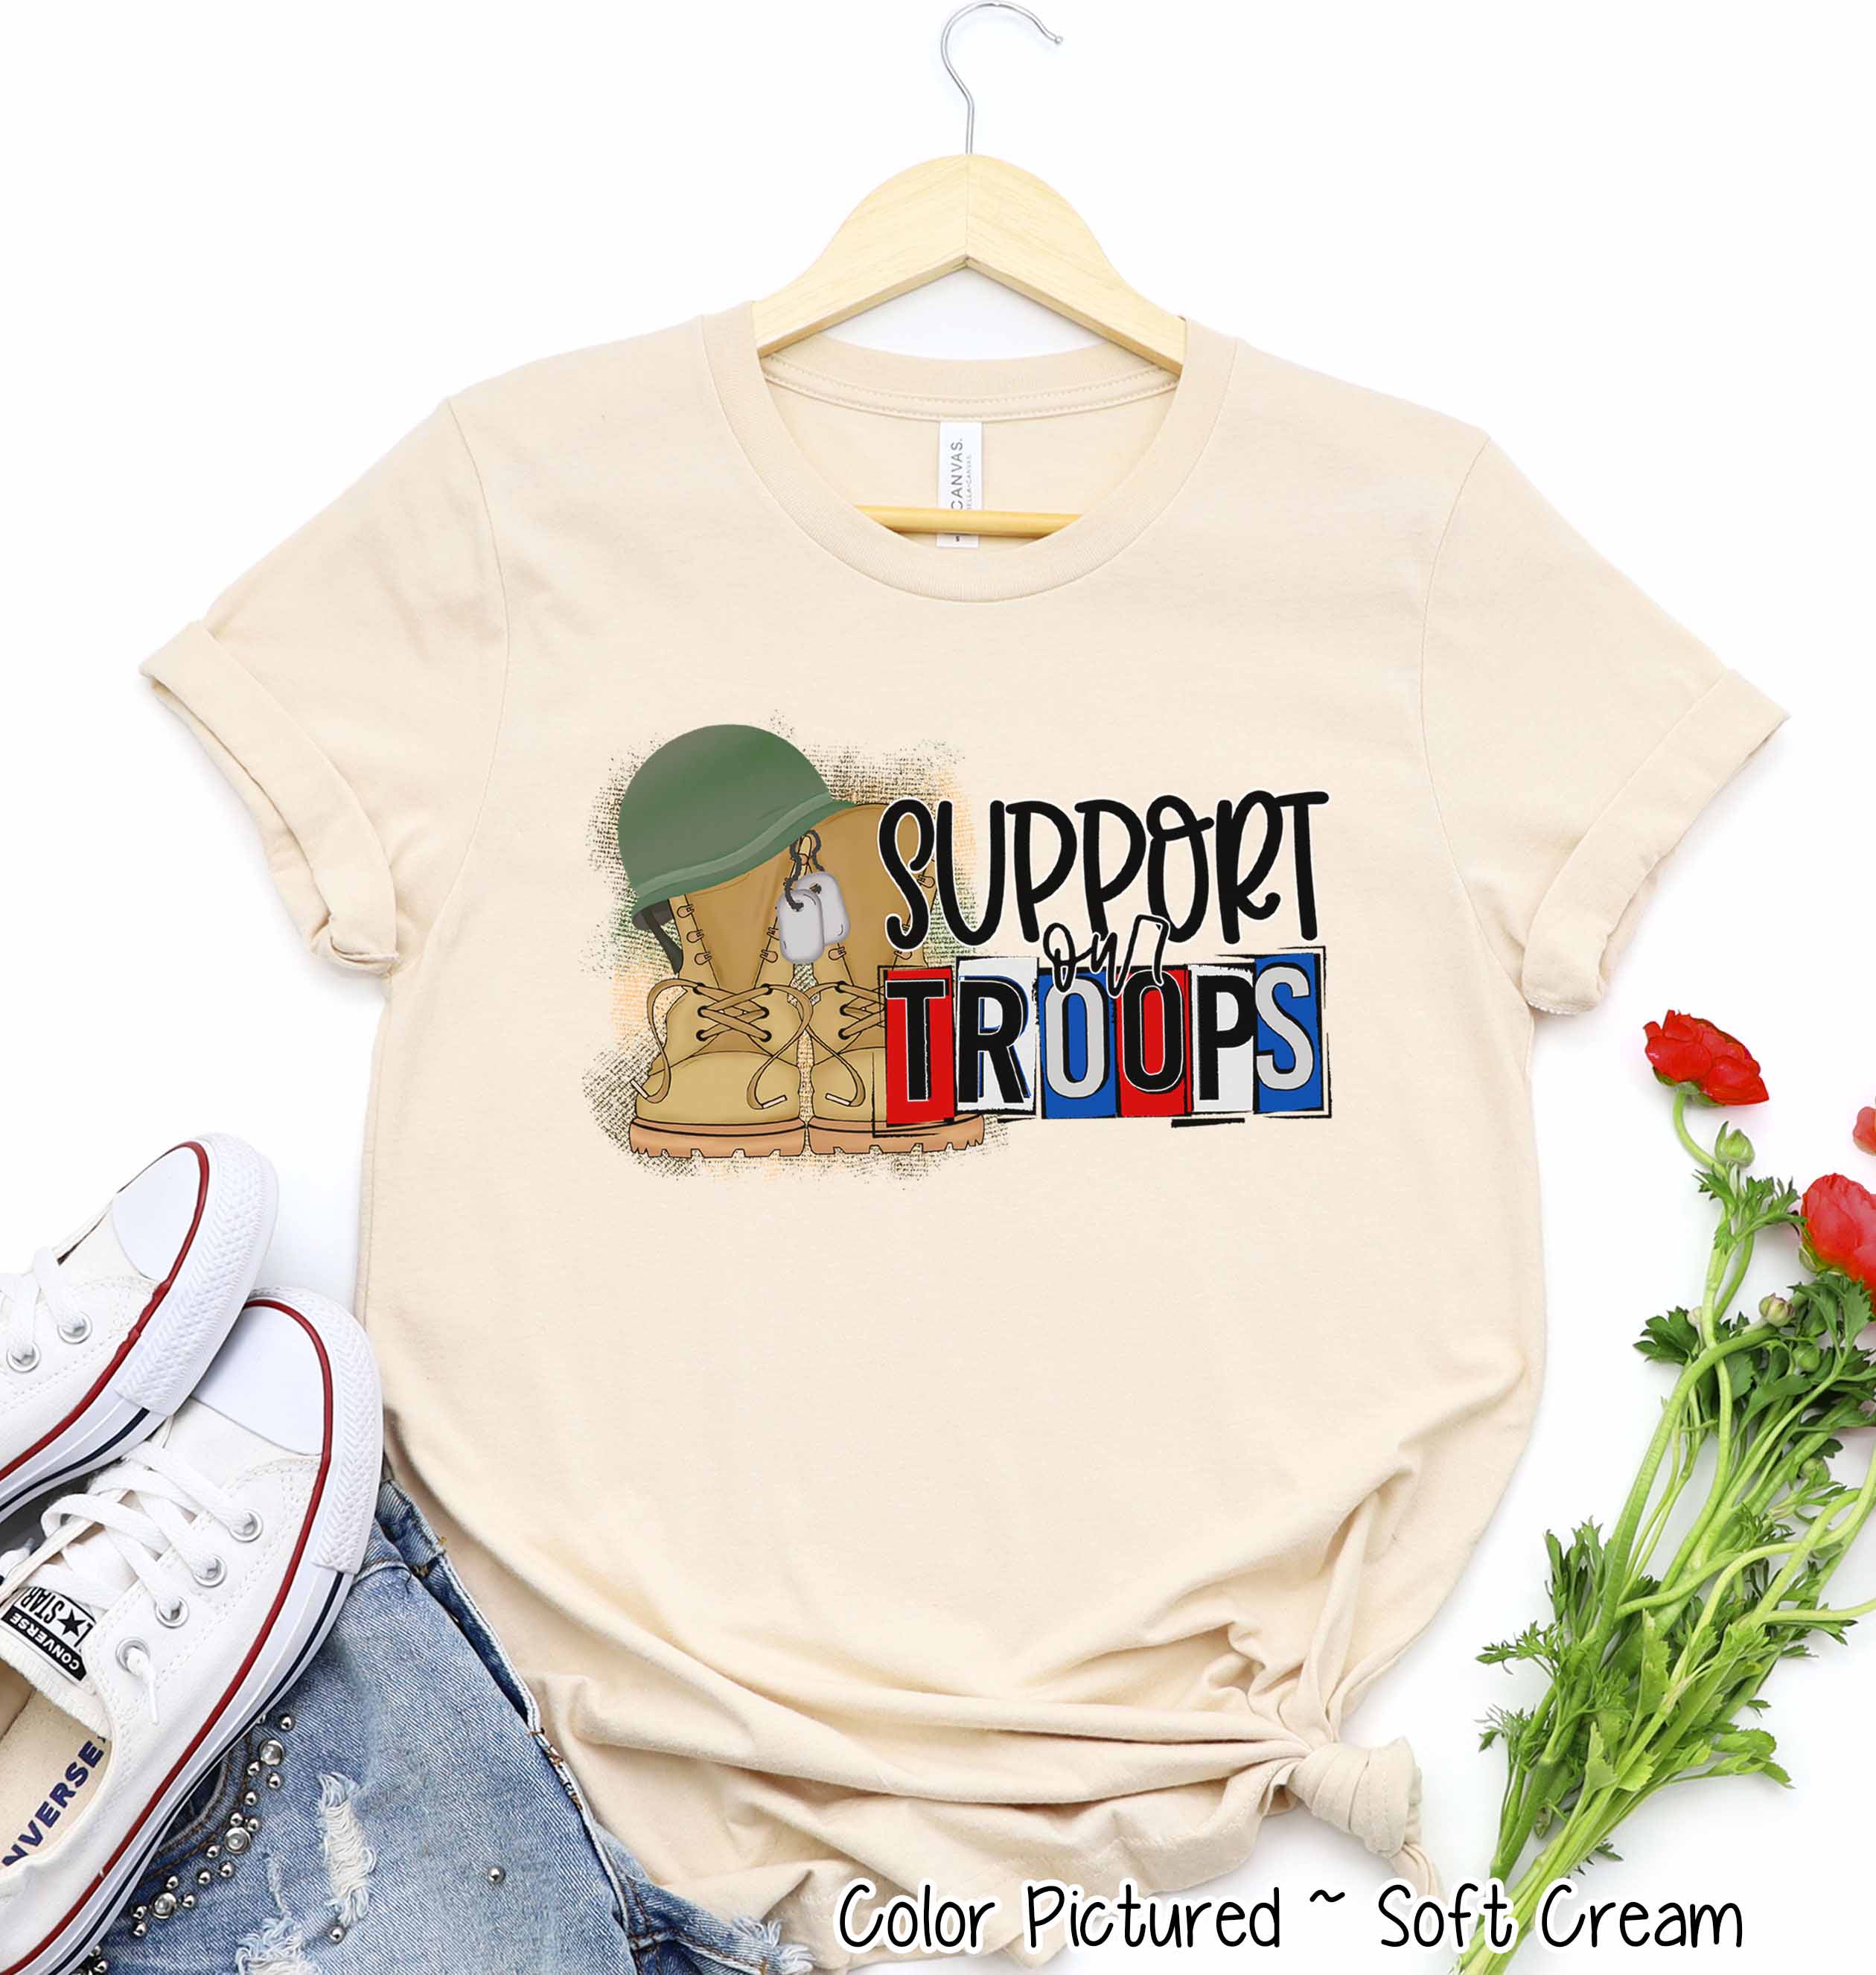 Support our Troops Military Tee